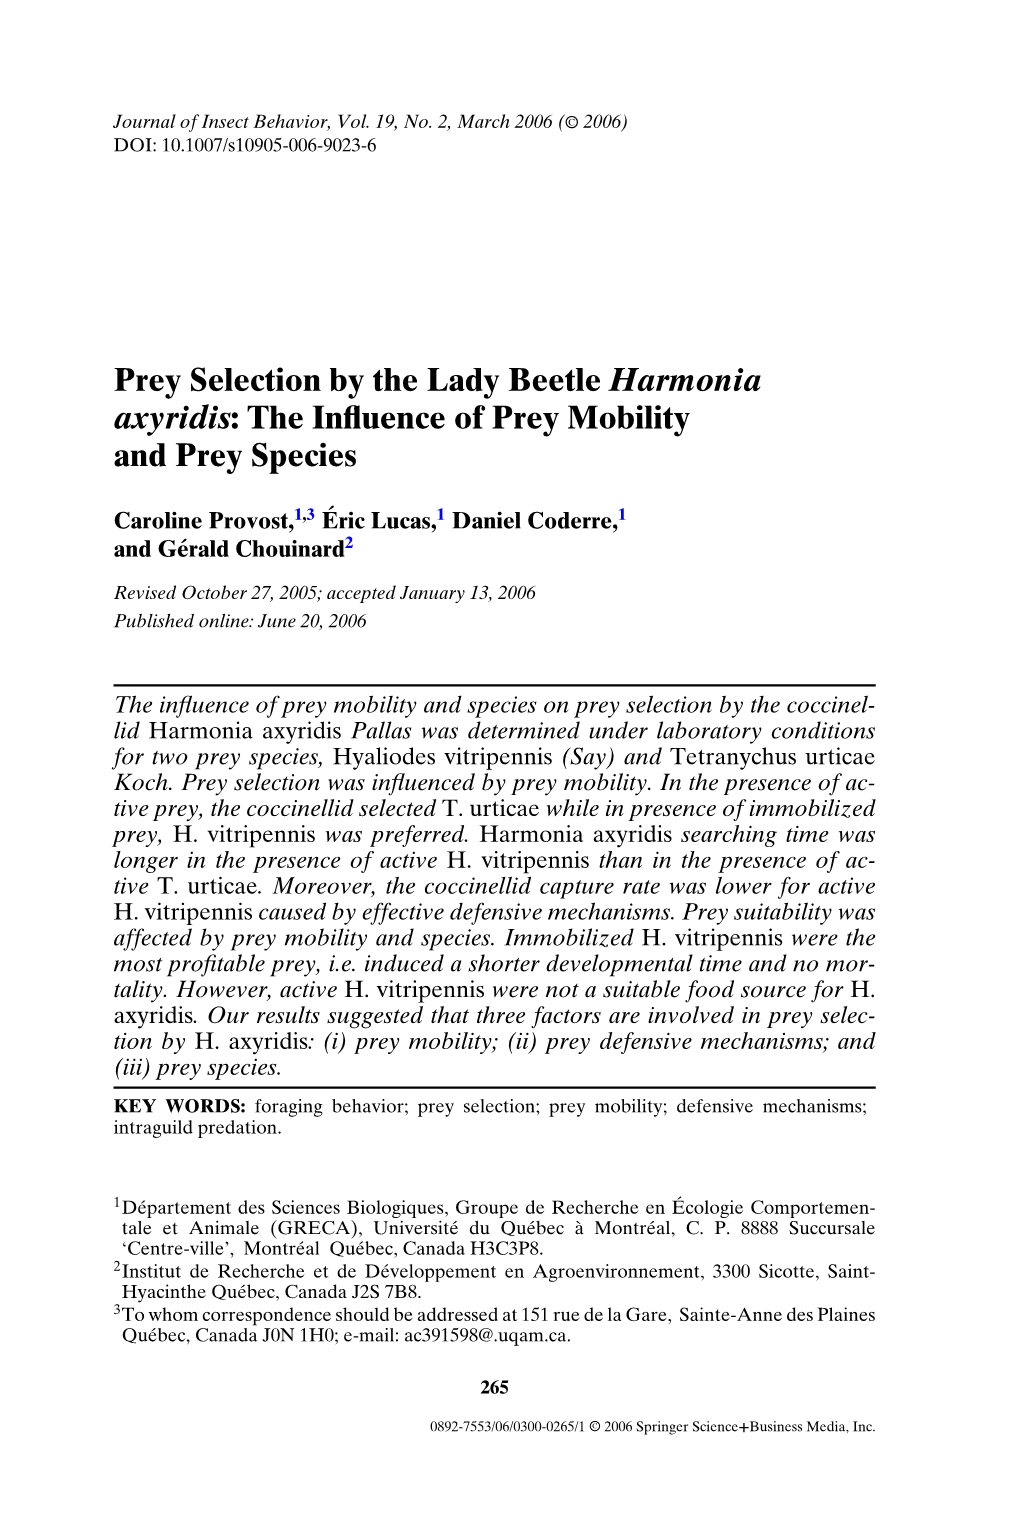 Prey Selection by the Lady Beetle Harmonia Axyridis: the Inﬂuence of Prey Mobility and Prey Species